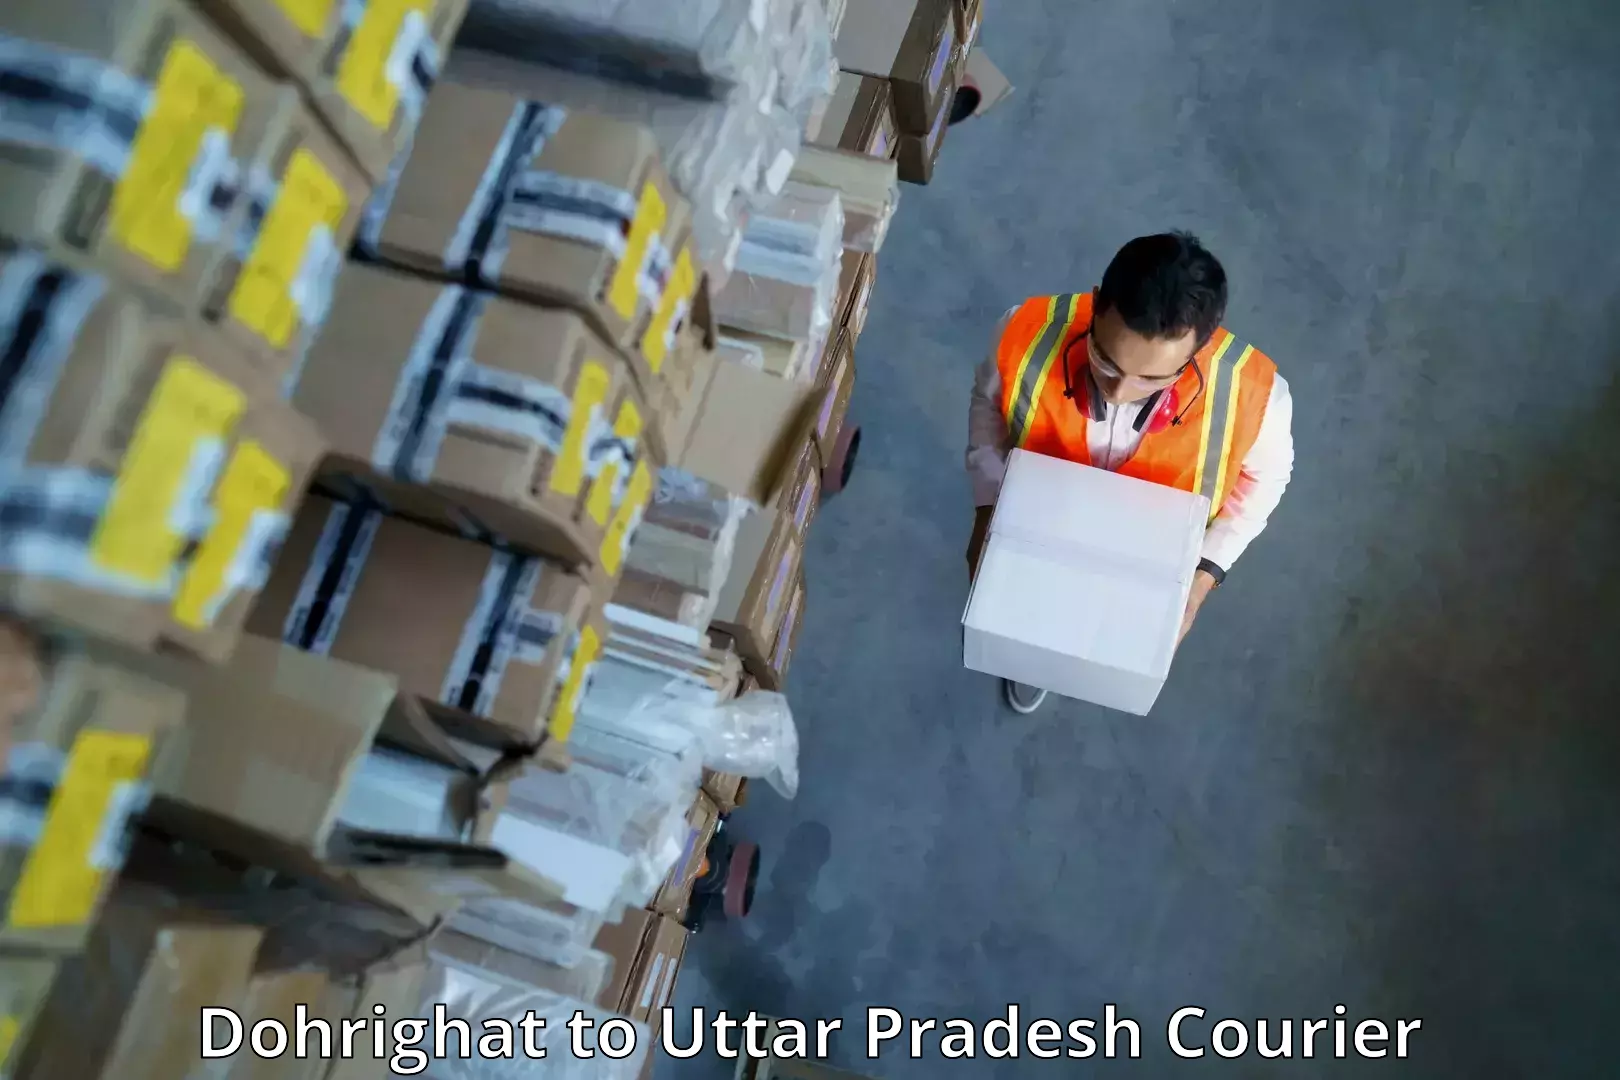 On-call courier service Dohrighat to Uttar Pradesh